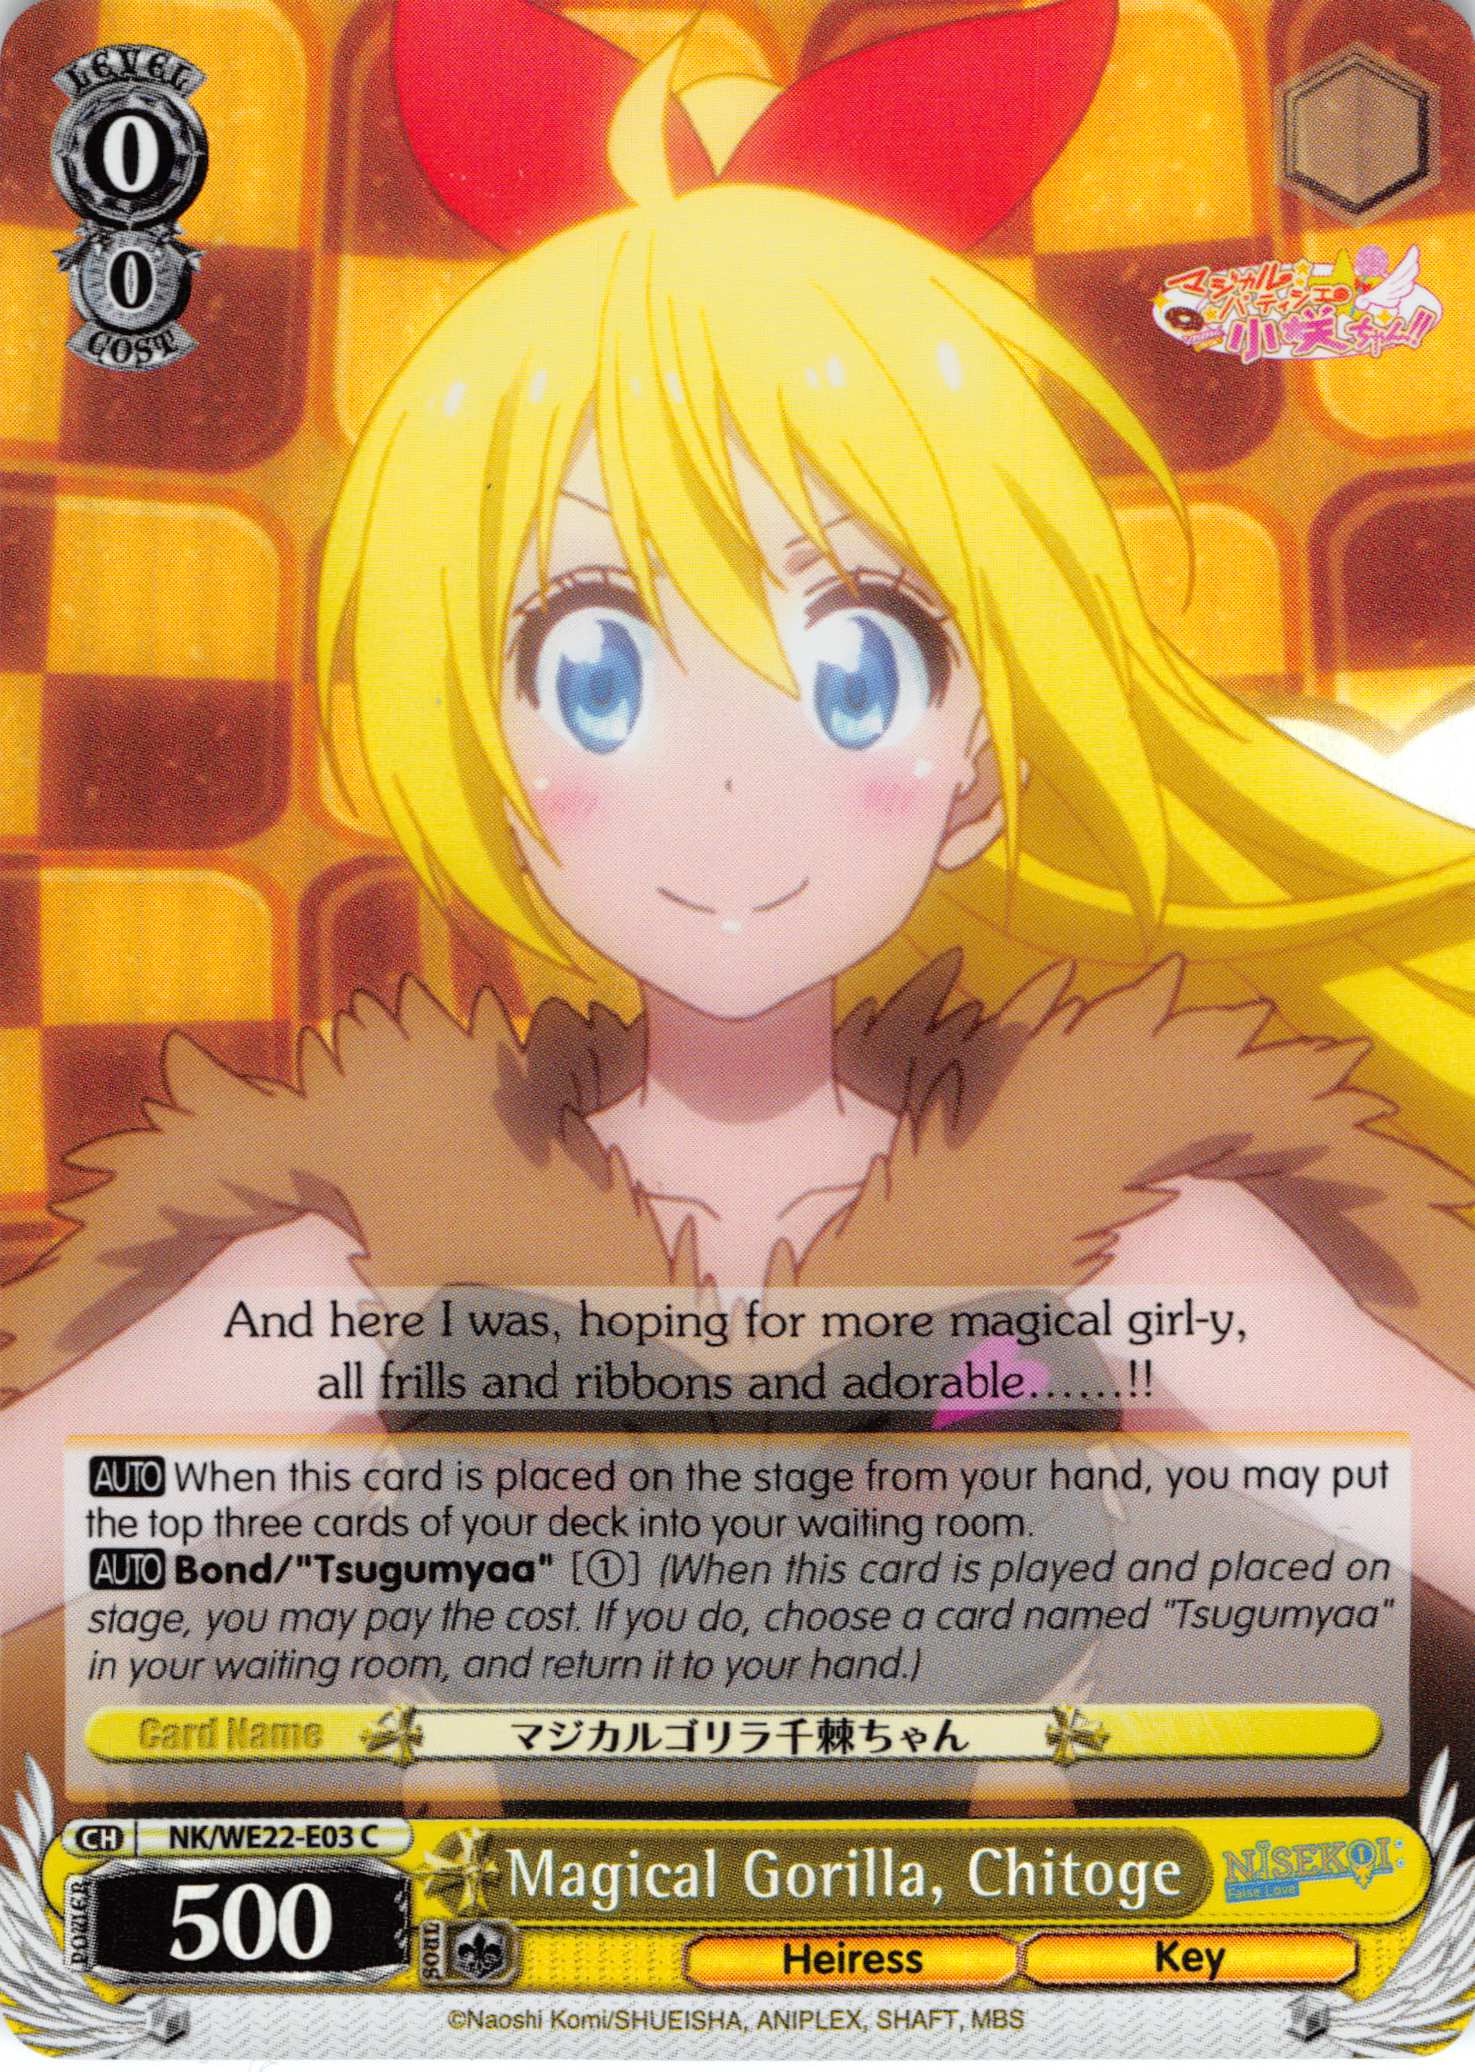 Magical Gorilla, Chitoge (NK/WE22-E03) (Parallel Foil) [NISEKOI Extra Booster]